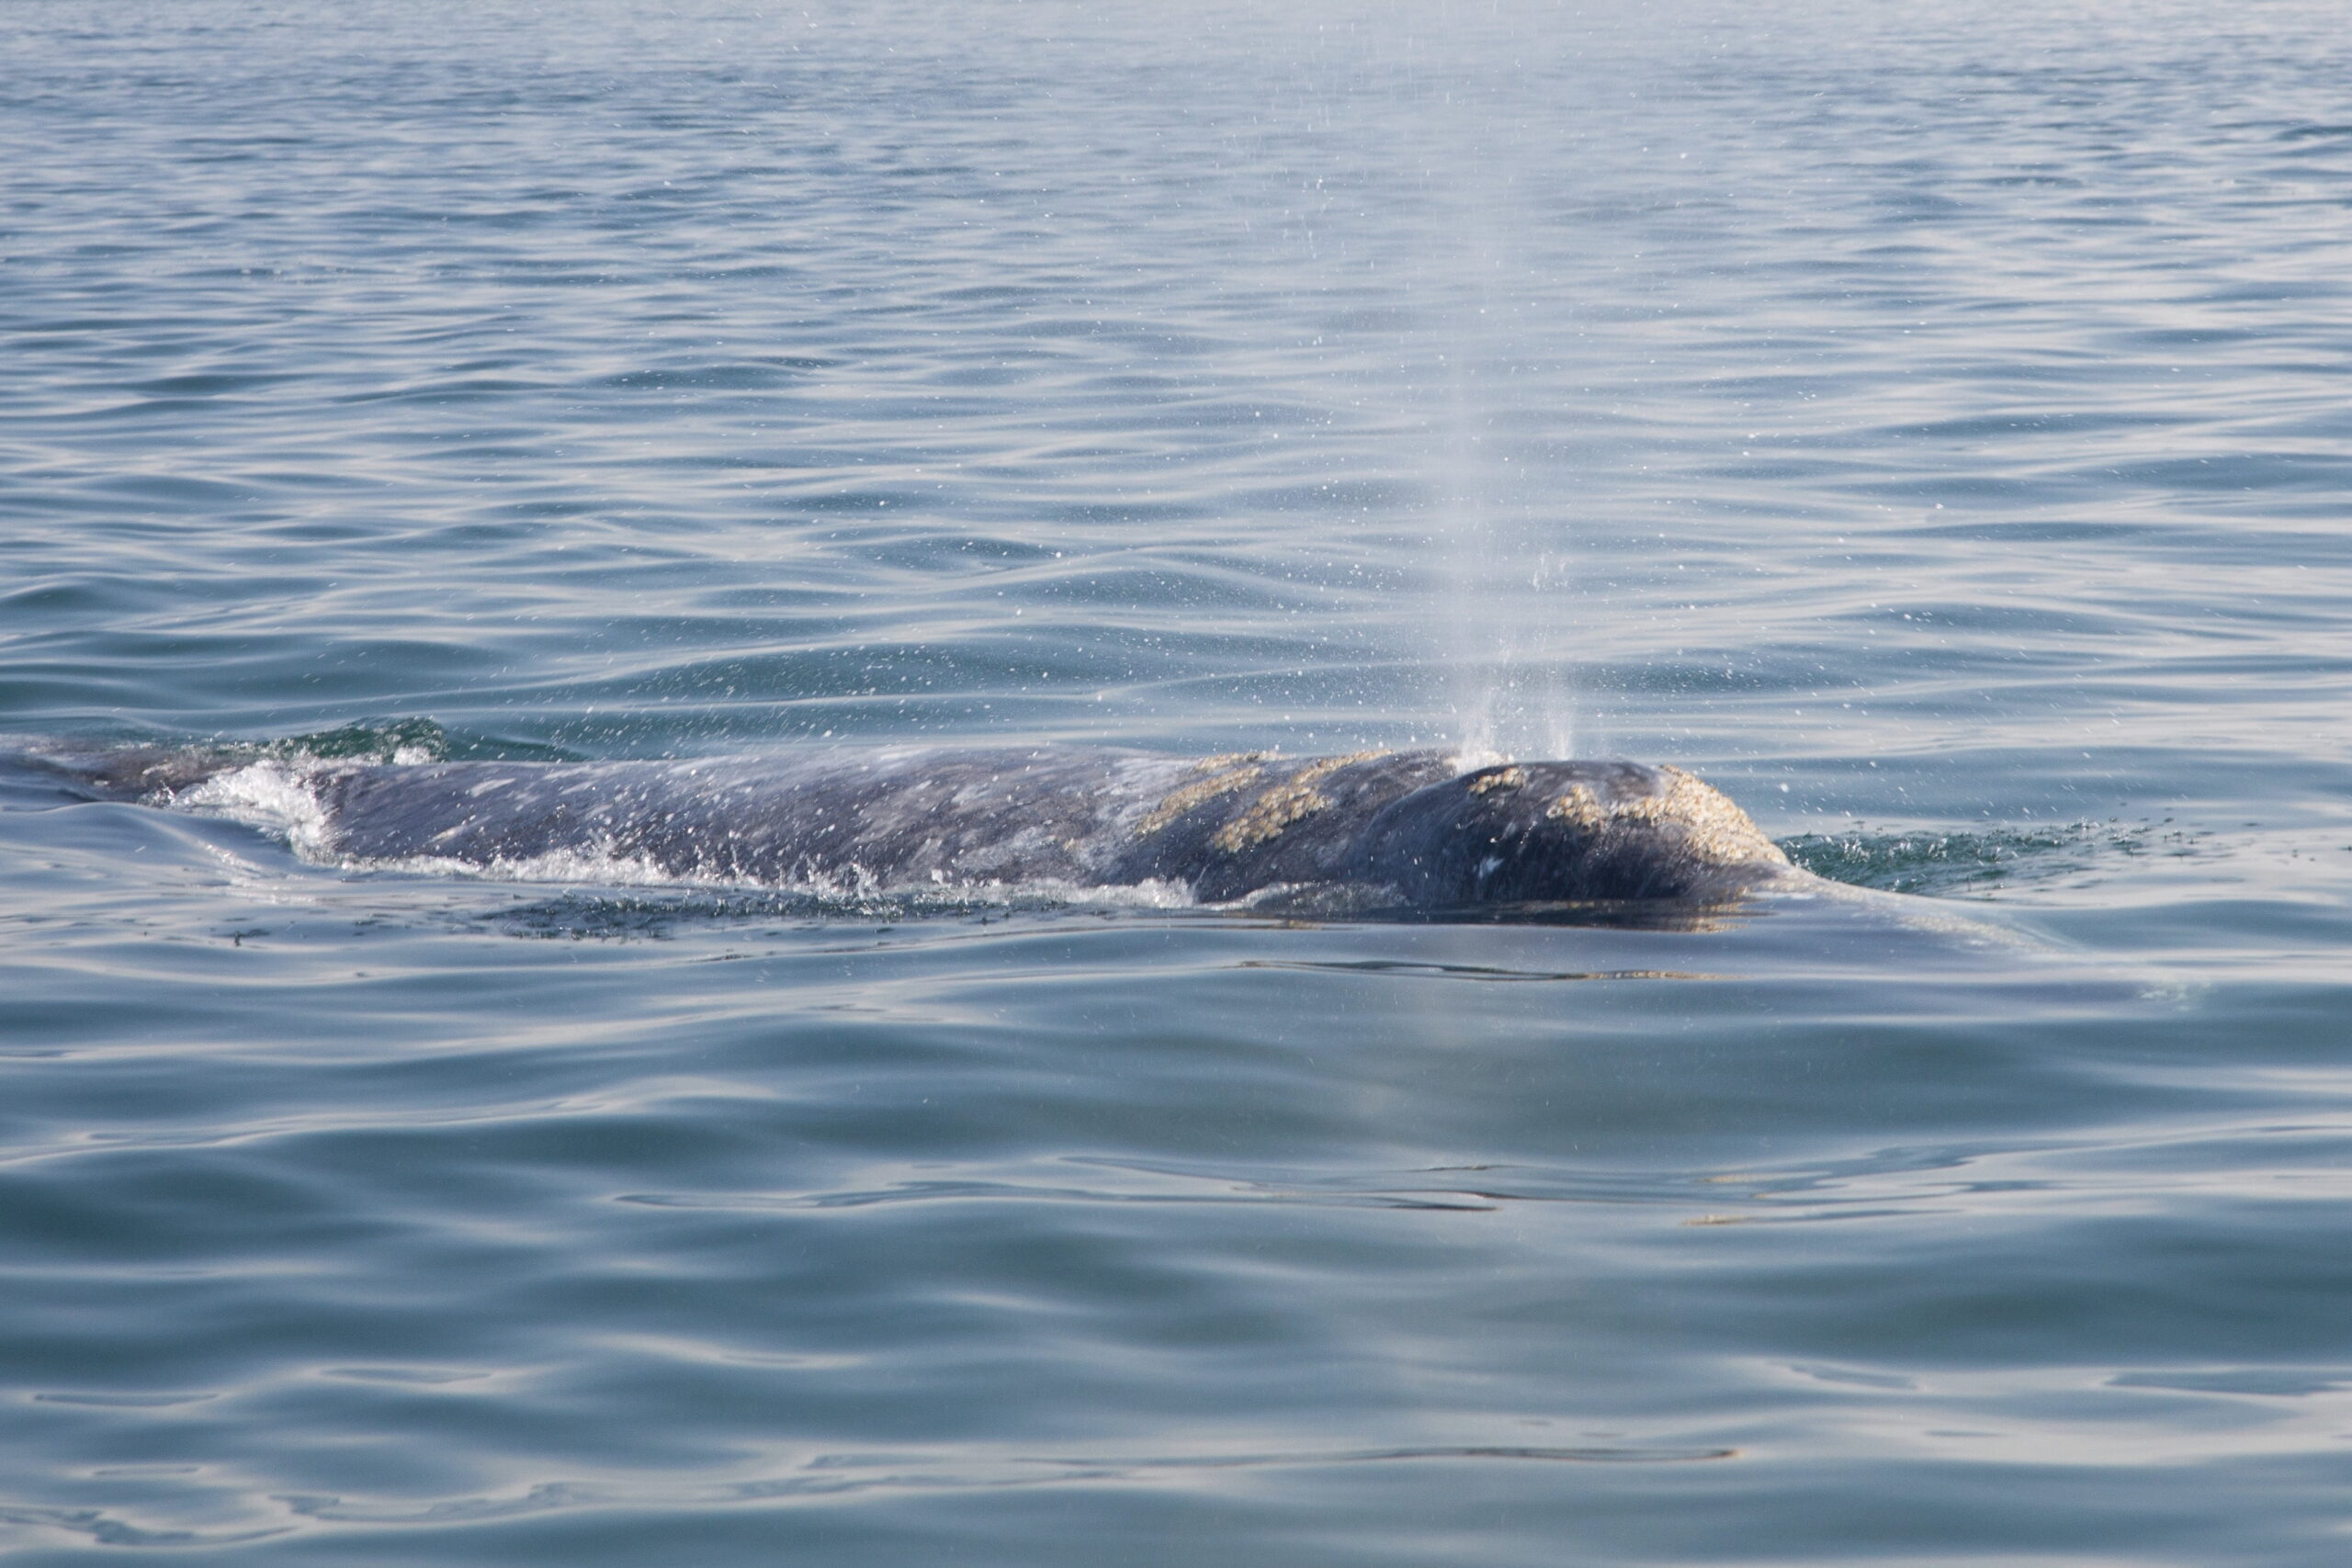 The California Gray Whales